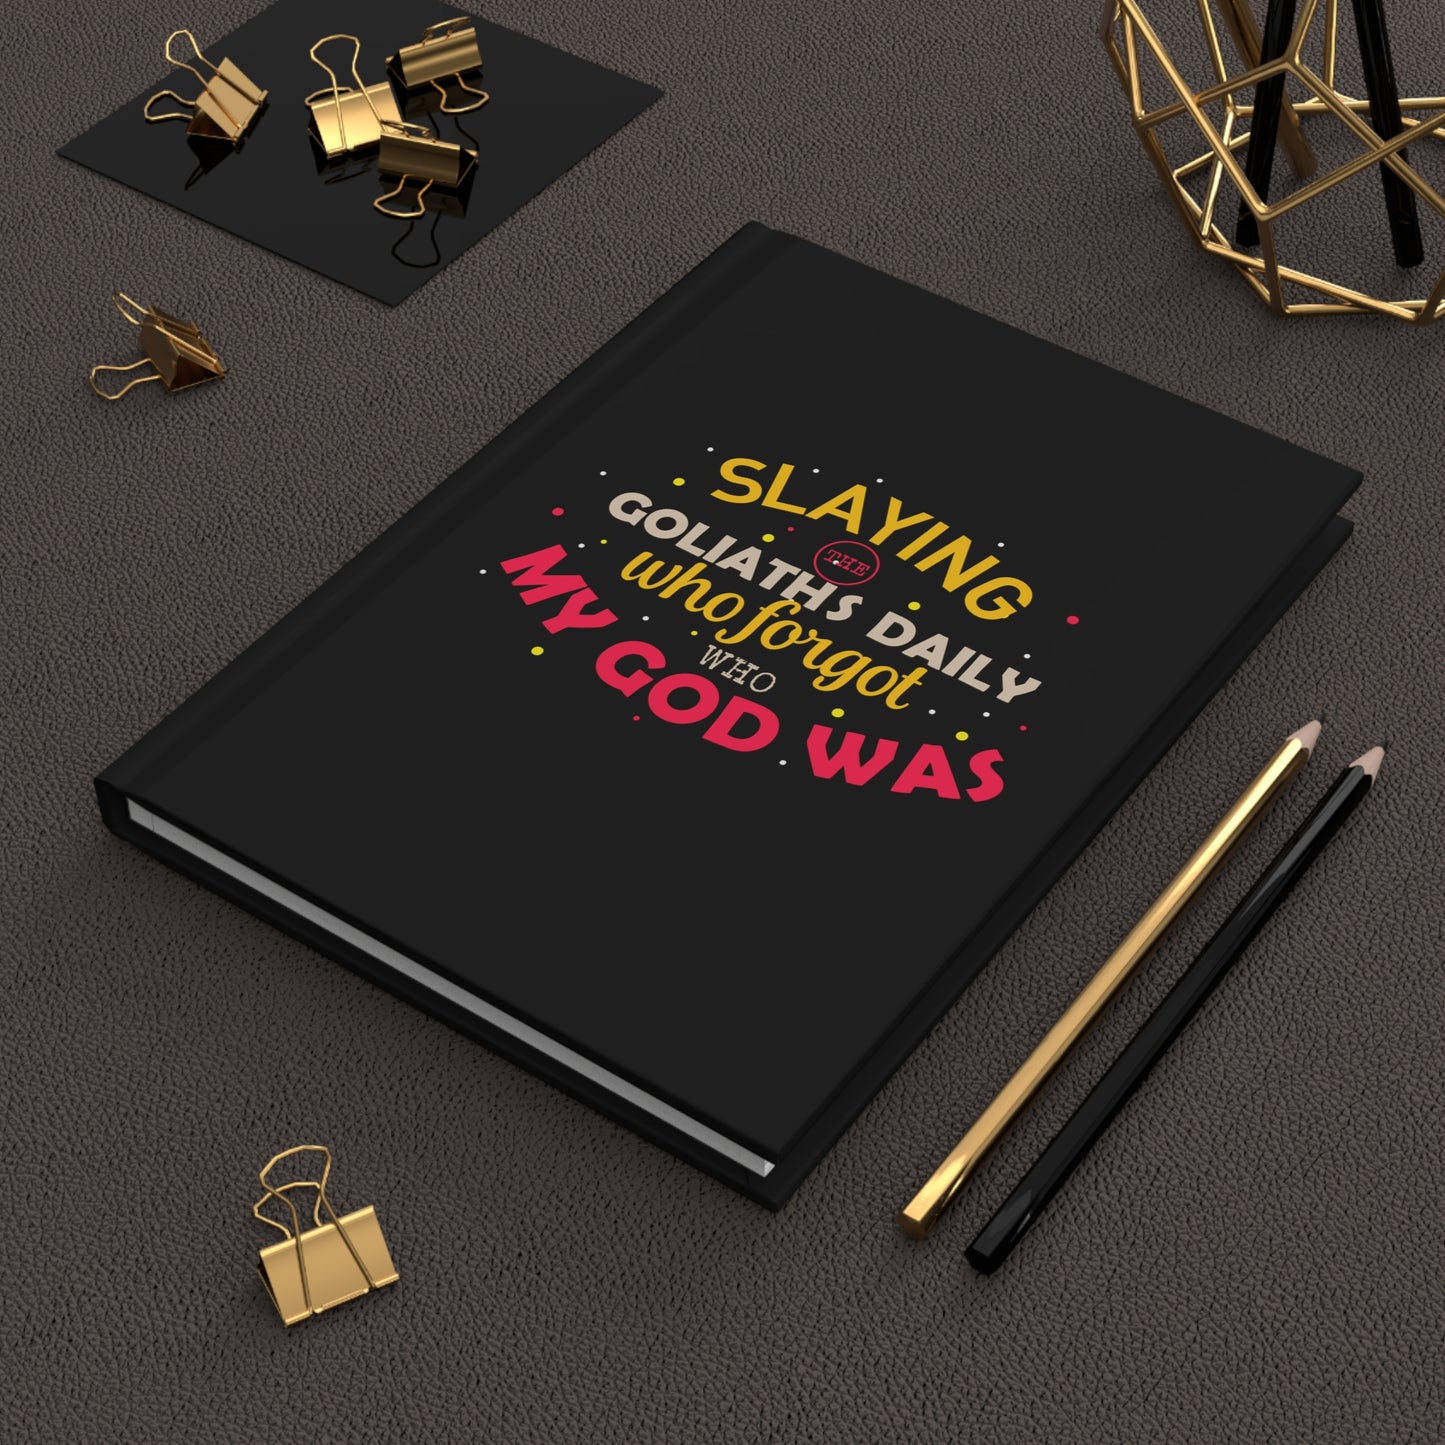 Slaying The Goliaths Daily Who Forgot Who My God Was Hardcover Journal Matte